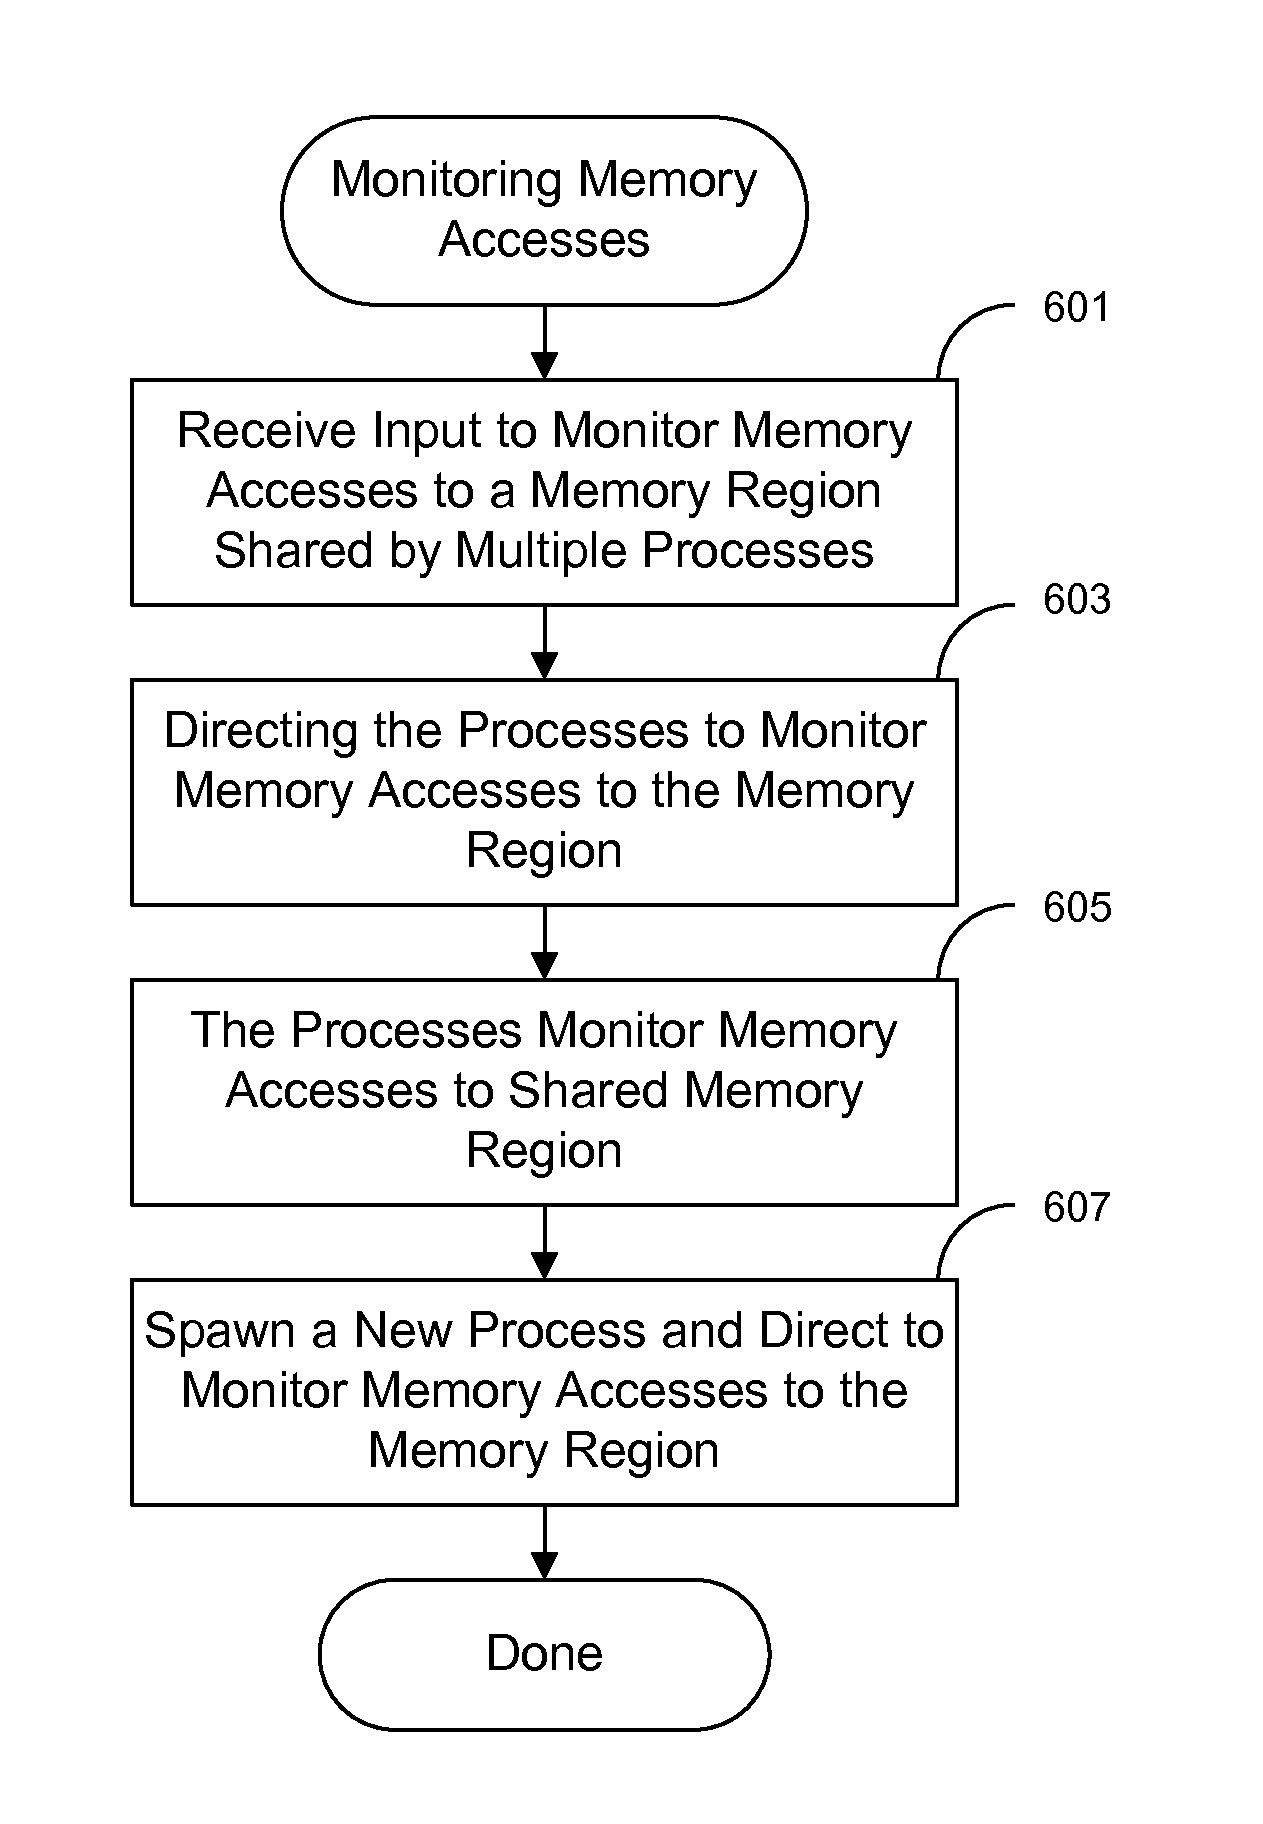 Monitoring memory accesses for computer programs